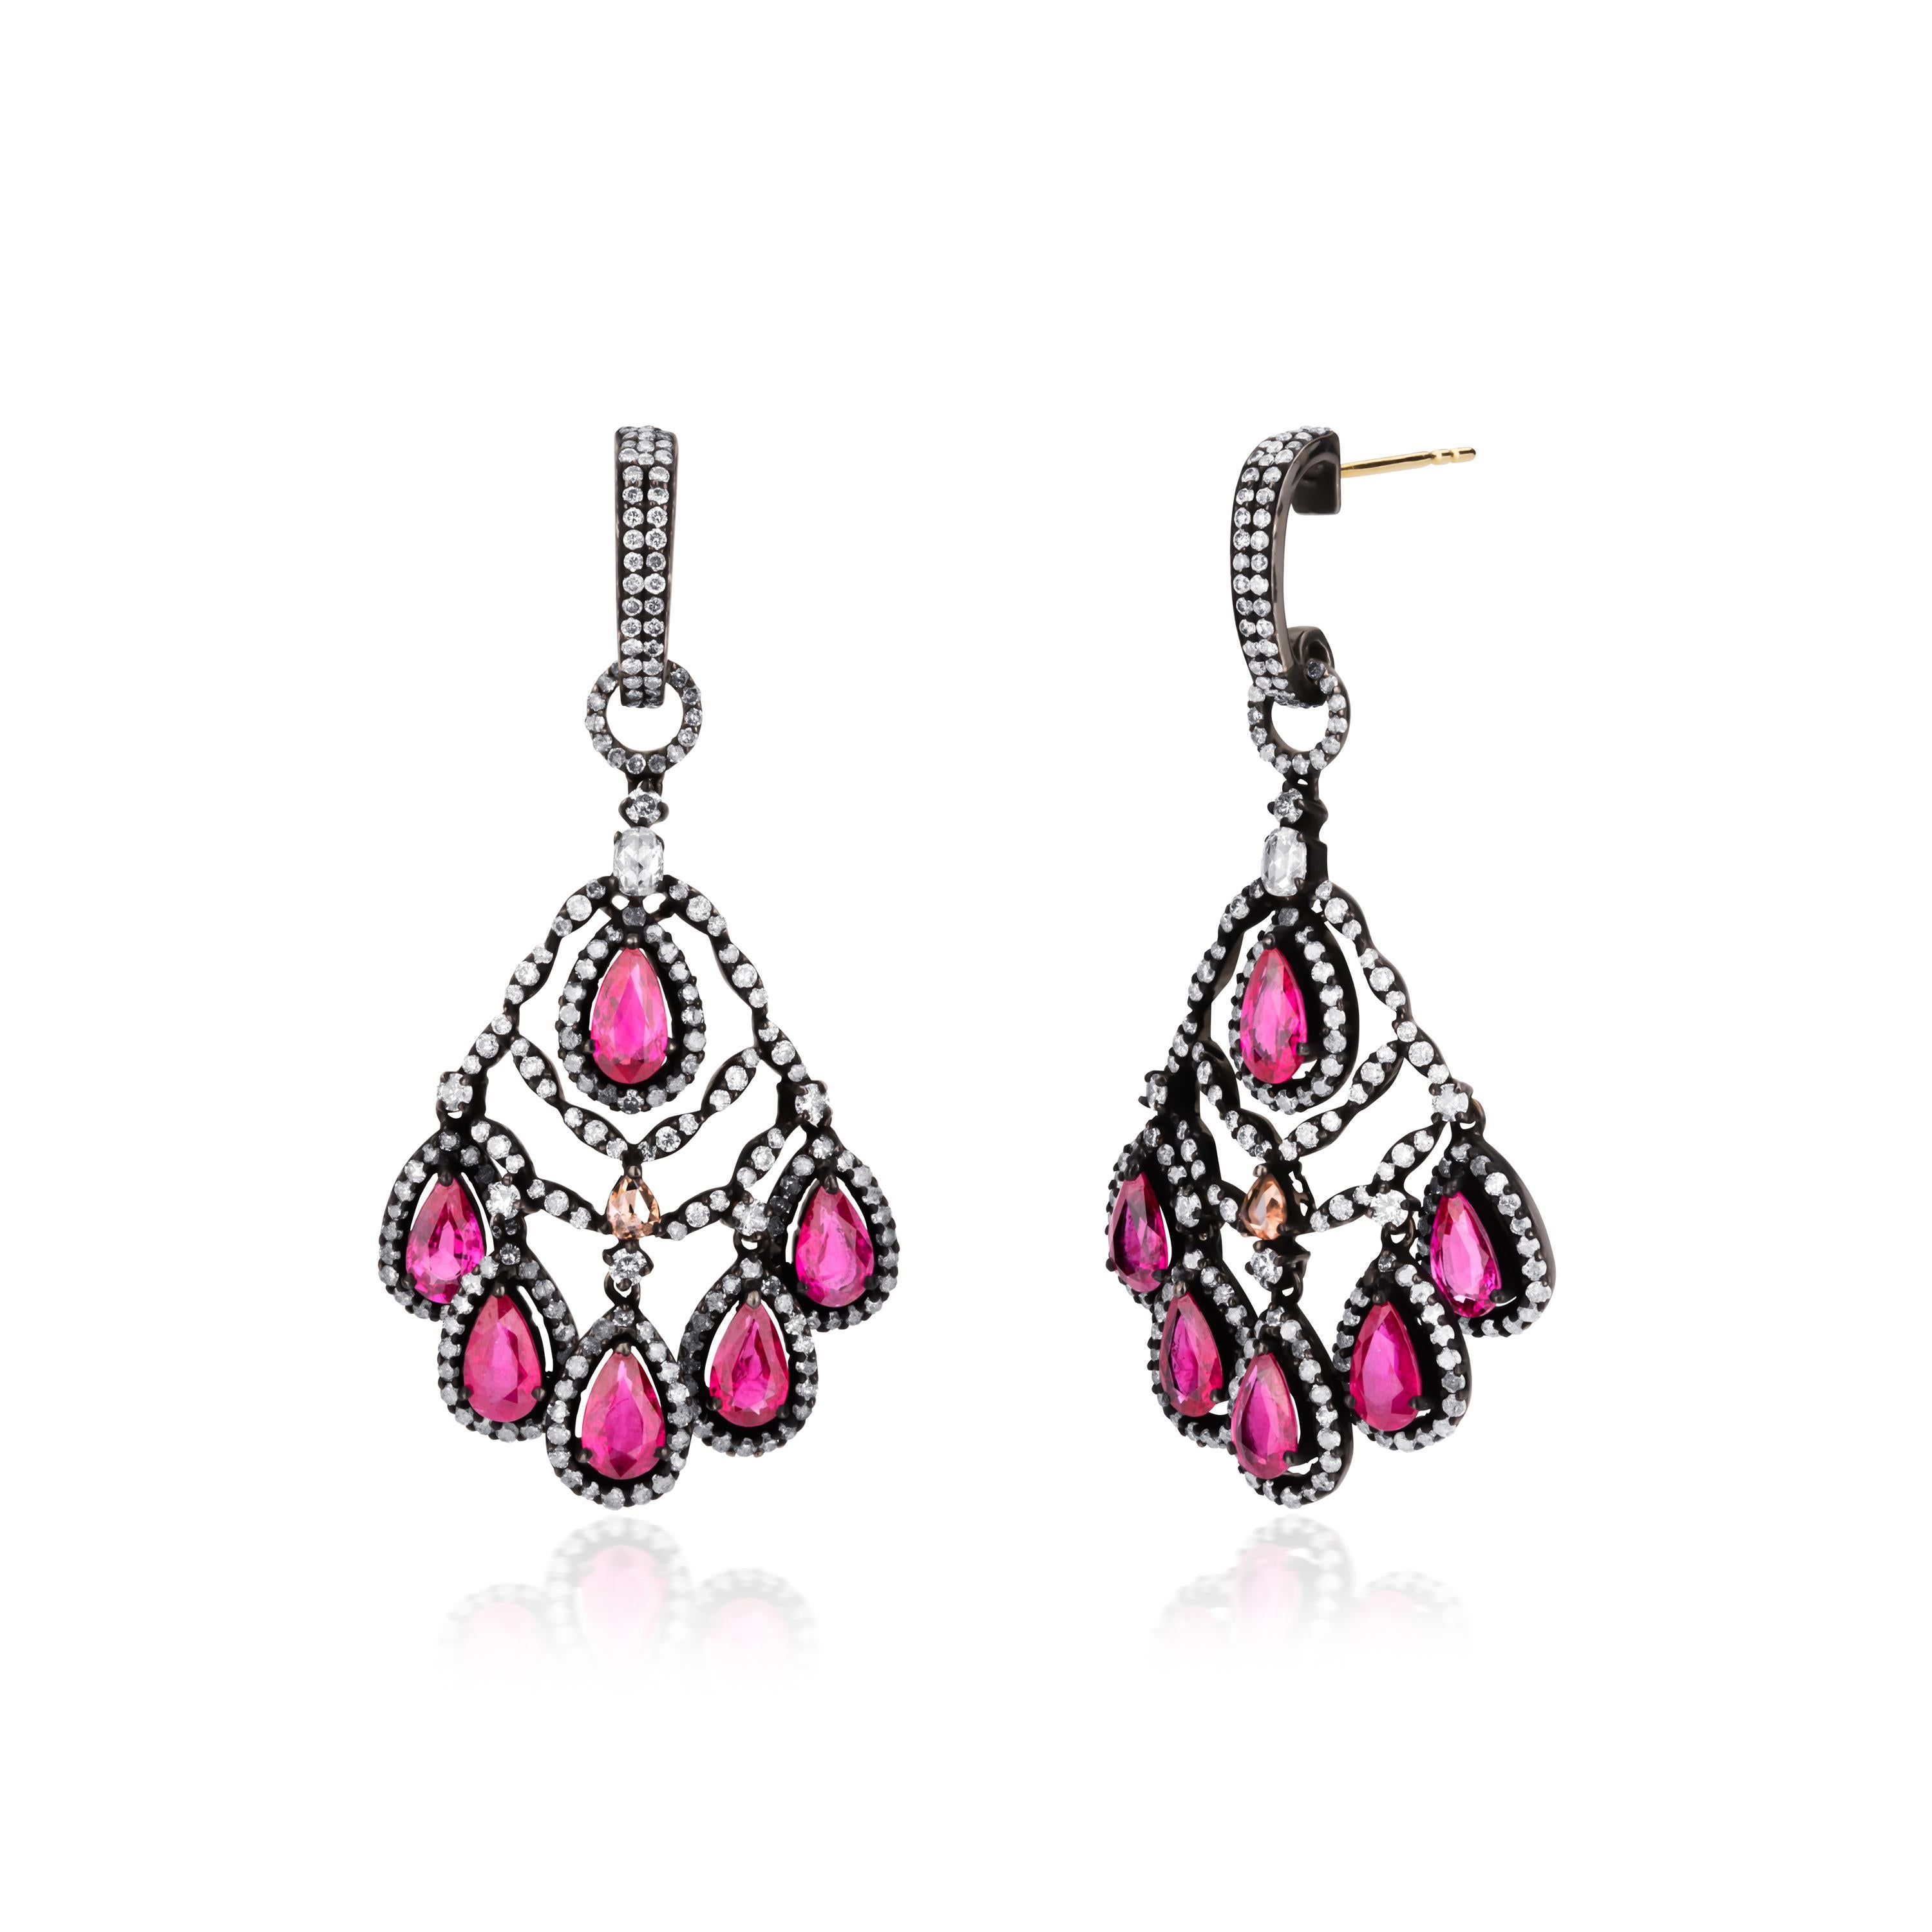 Victorian 10.61cttw Pear Ruby and Diamond Chandelier Earrings In New Condition For Sale In New York, NY